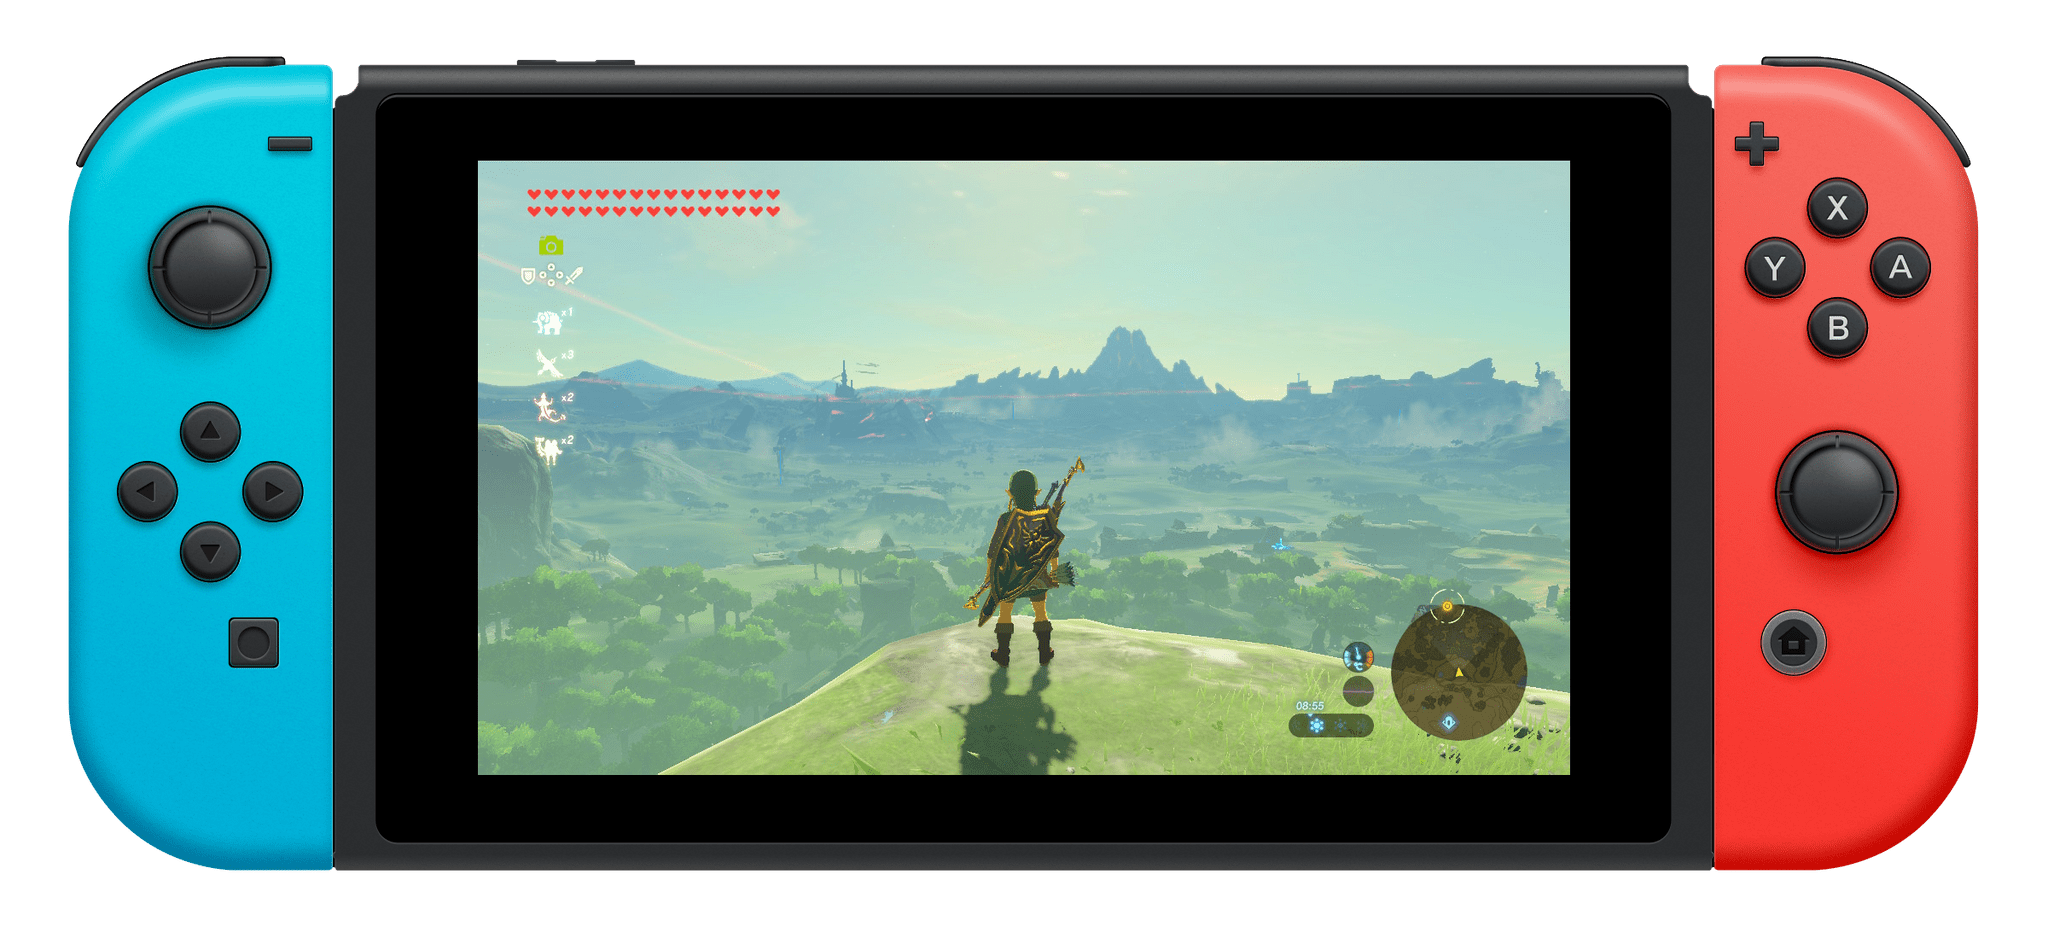 Breath of the Wild, framed with SwitchFrame in Shortcuts.